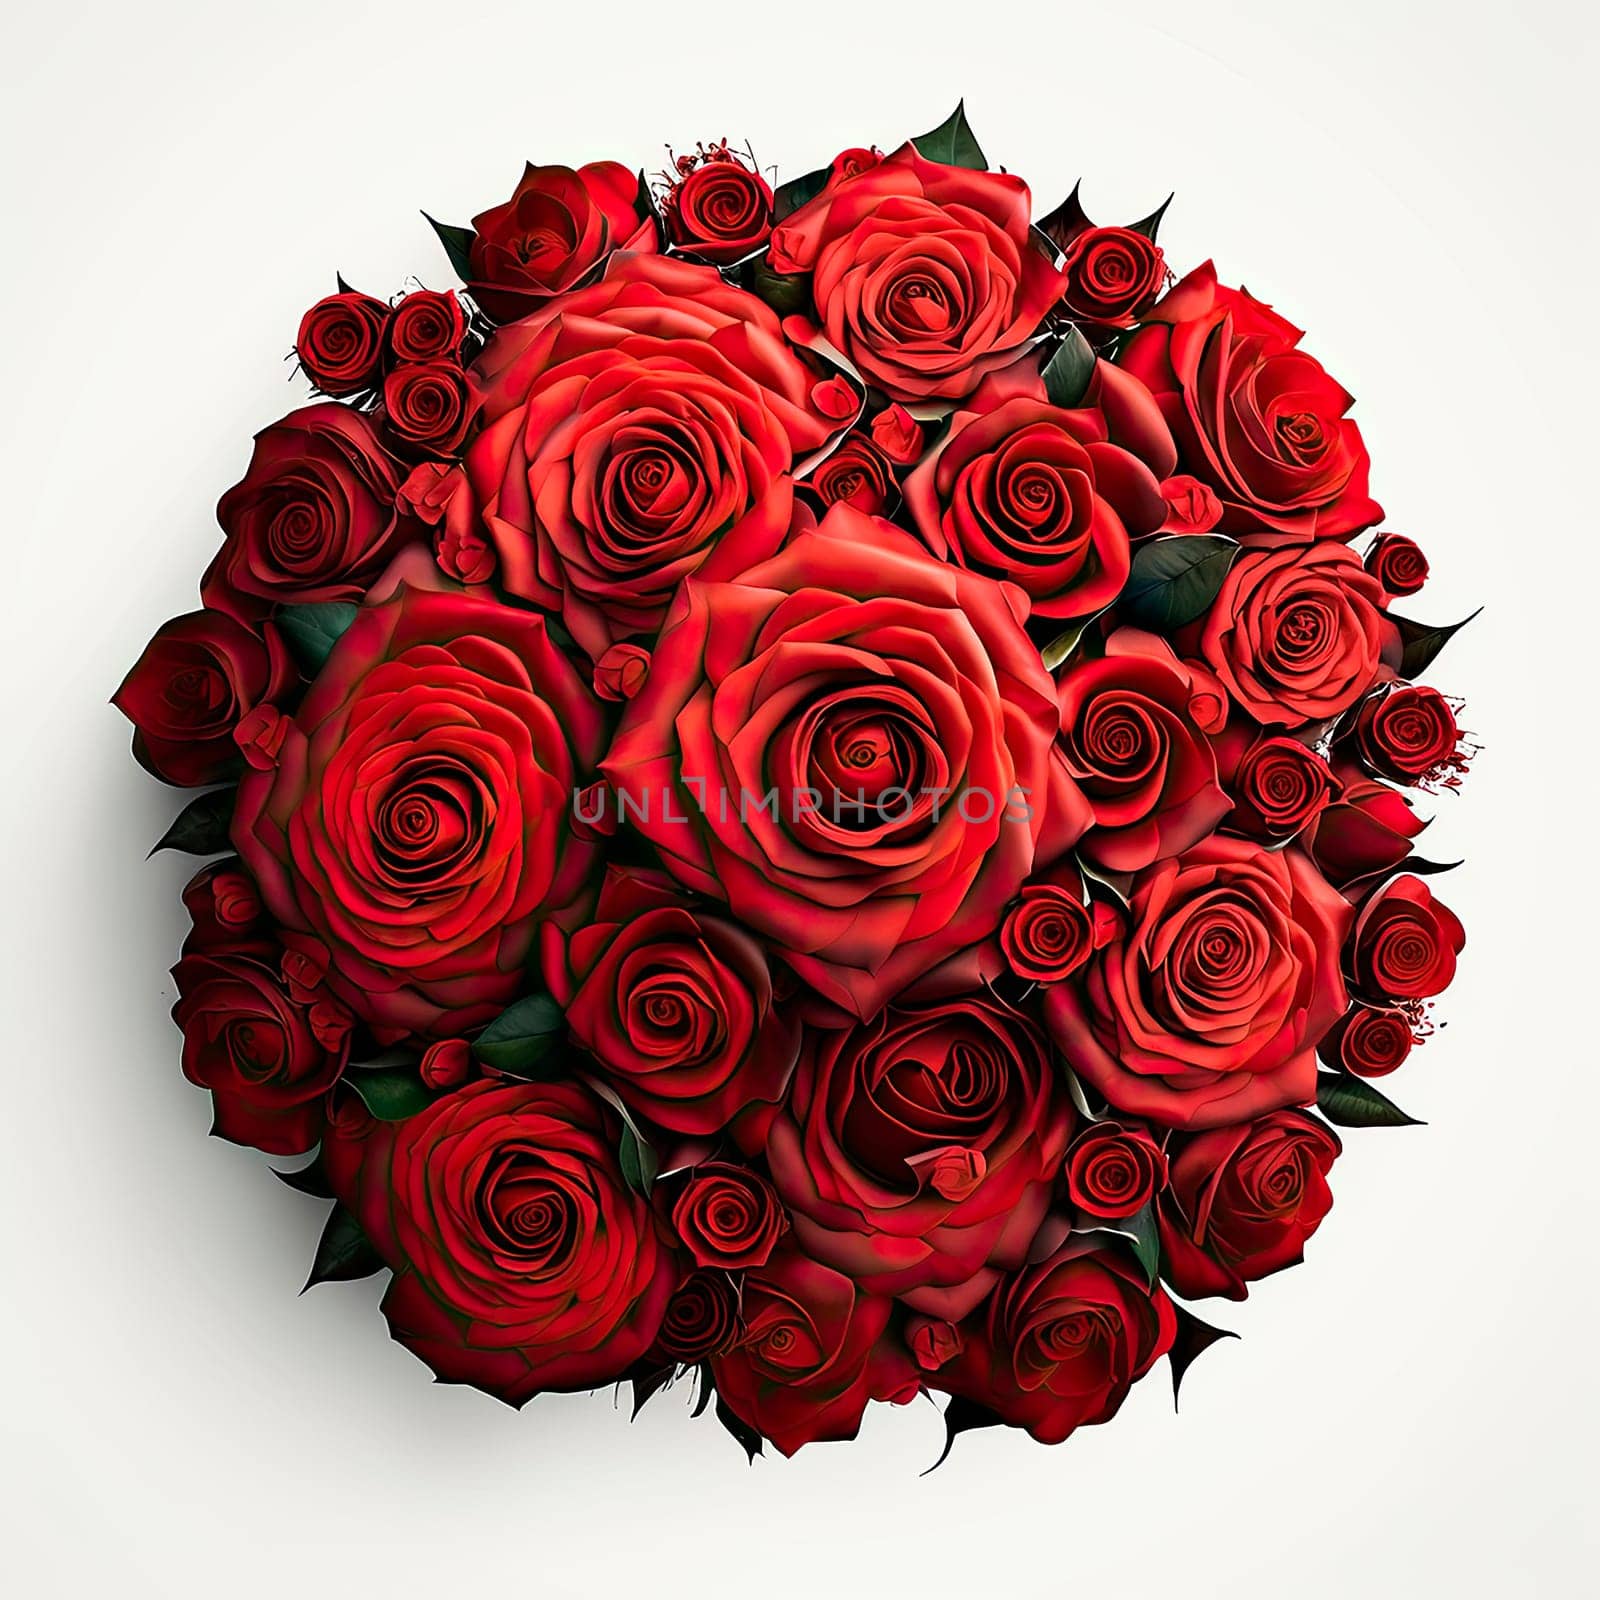 large bouquet of red roses a lot on a white background. by yanadjana